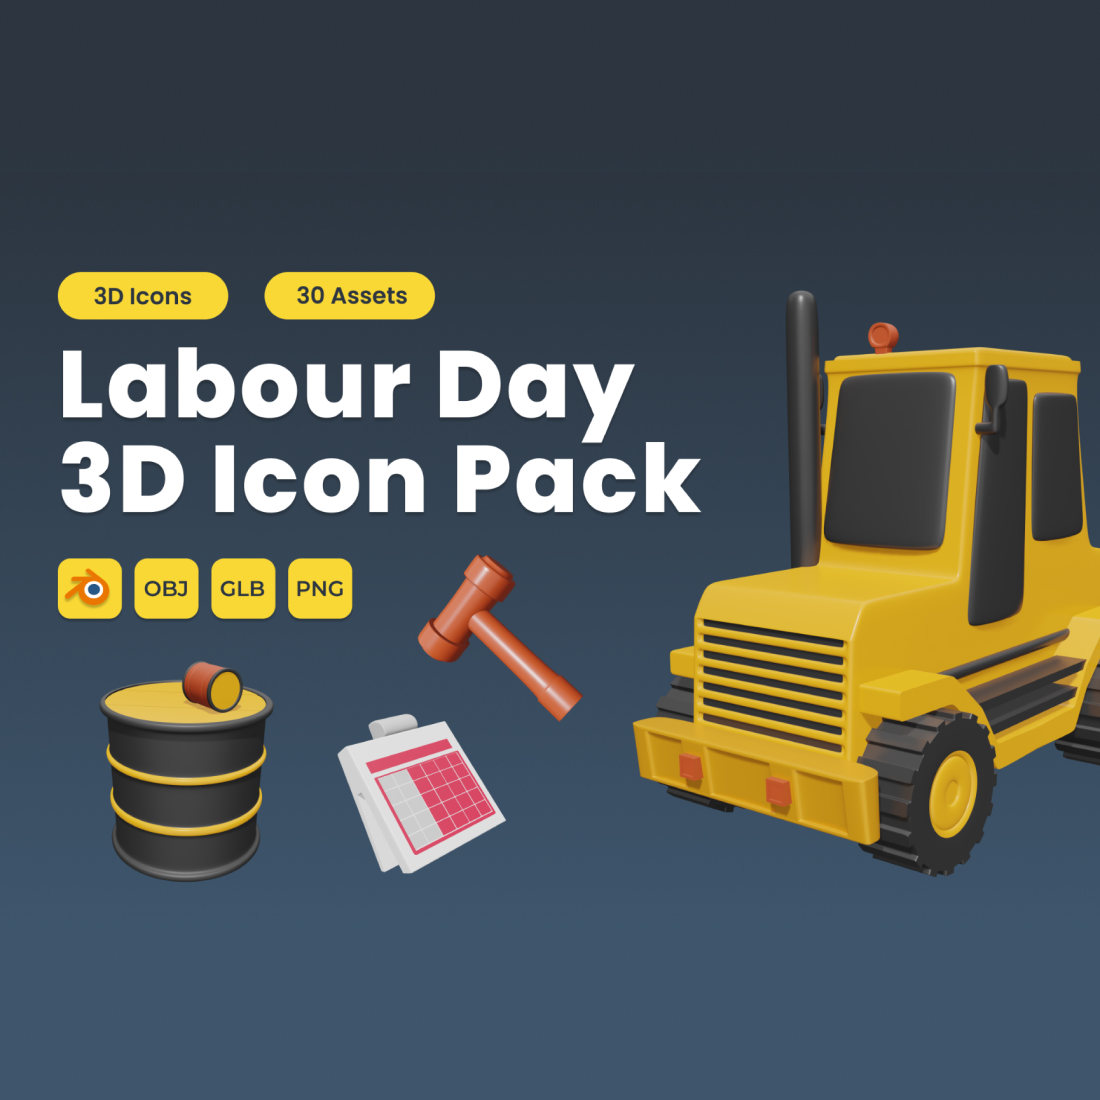 Labour Day 3D Icon Pack Vol 1 preview image.